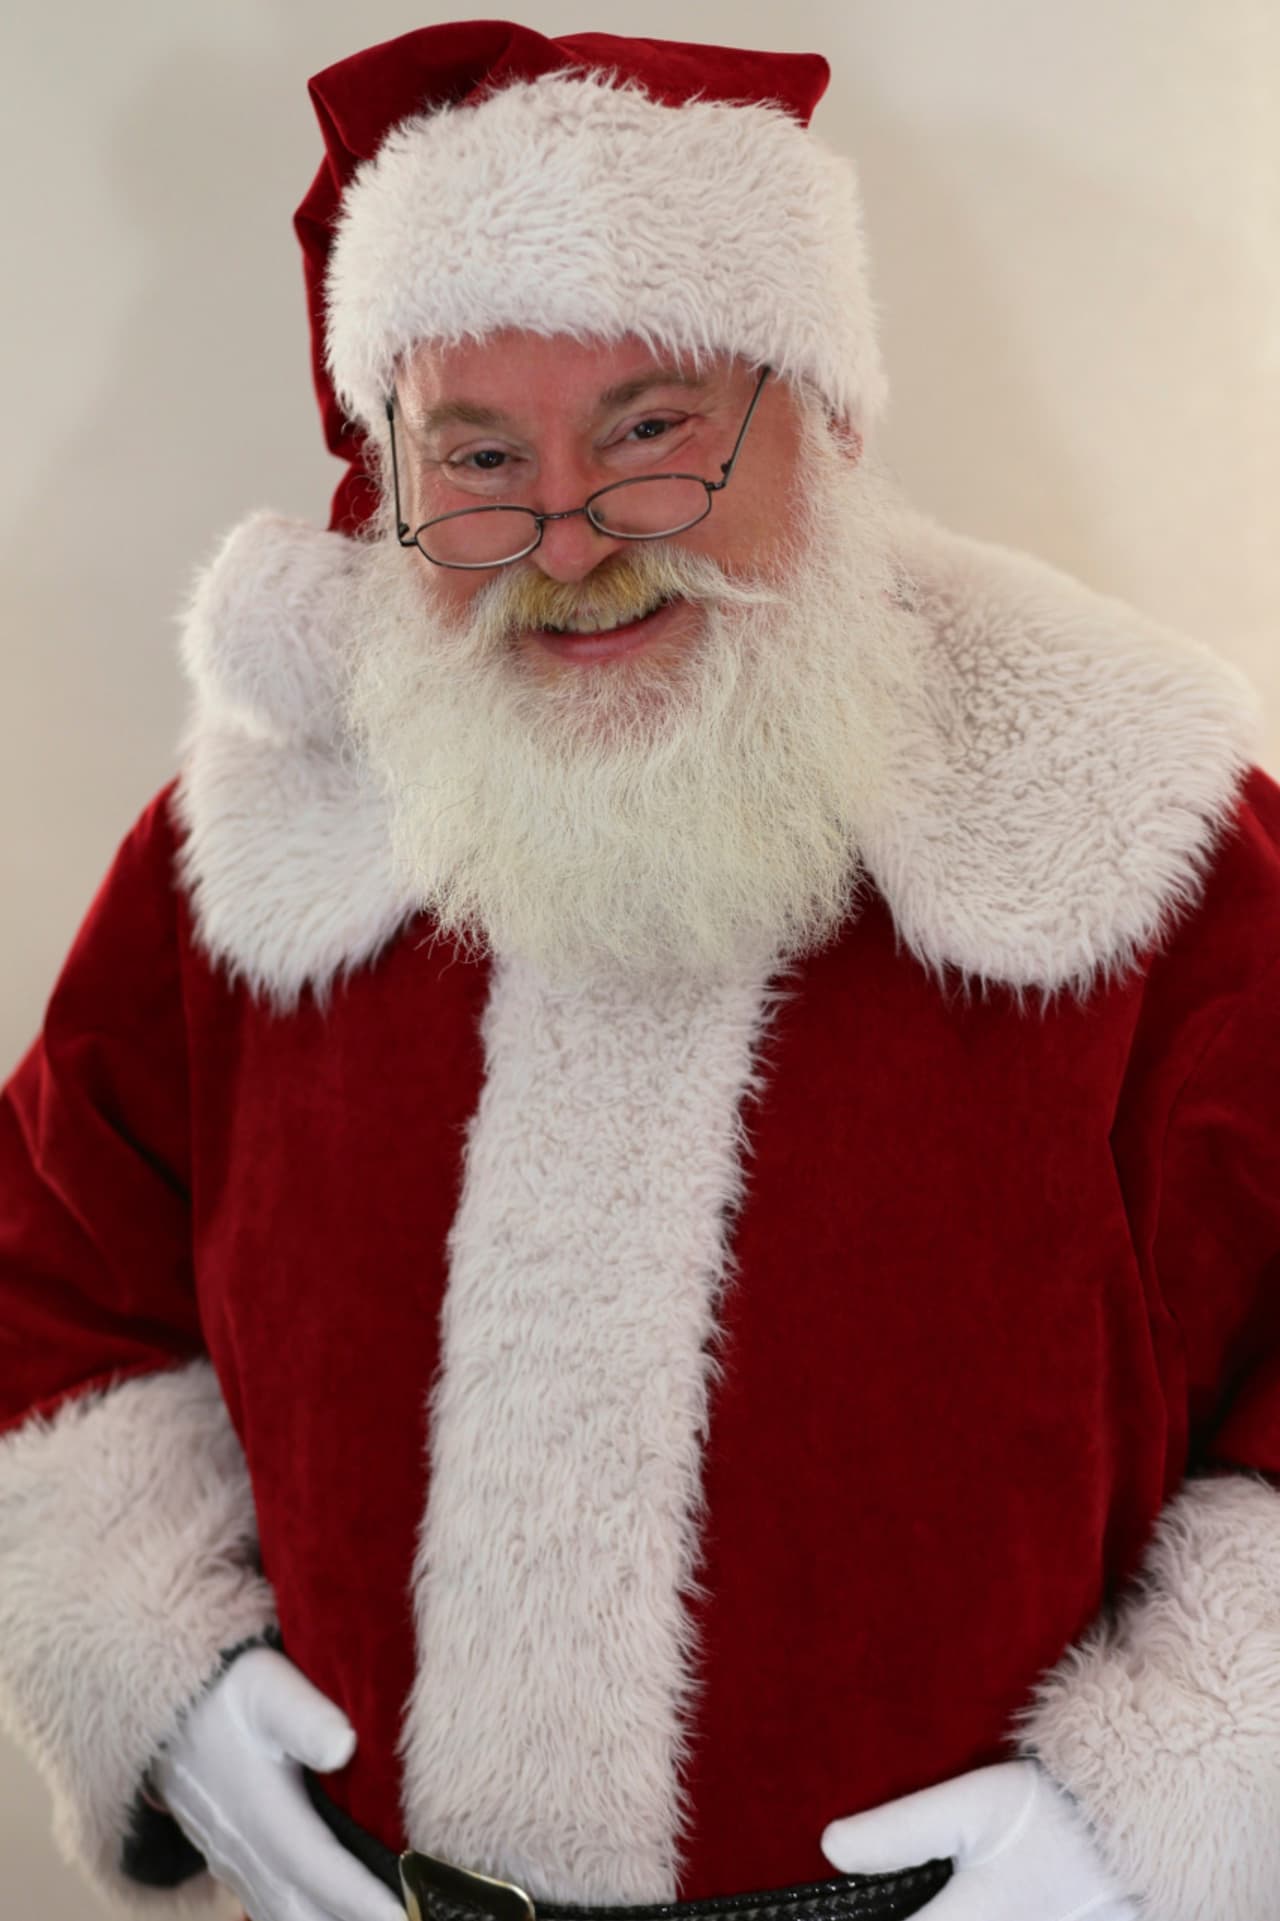 Santa Claus will be visiting neighborhoods in New Milford Sunday, Dec. 11.